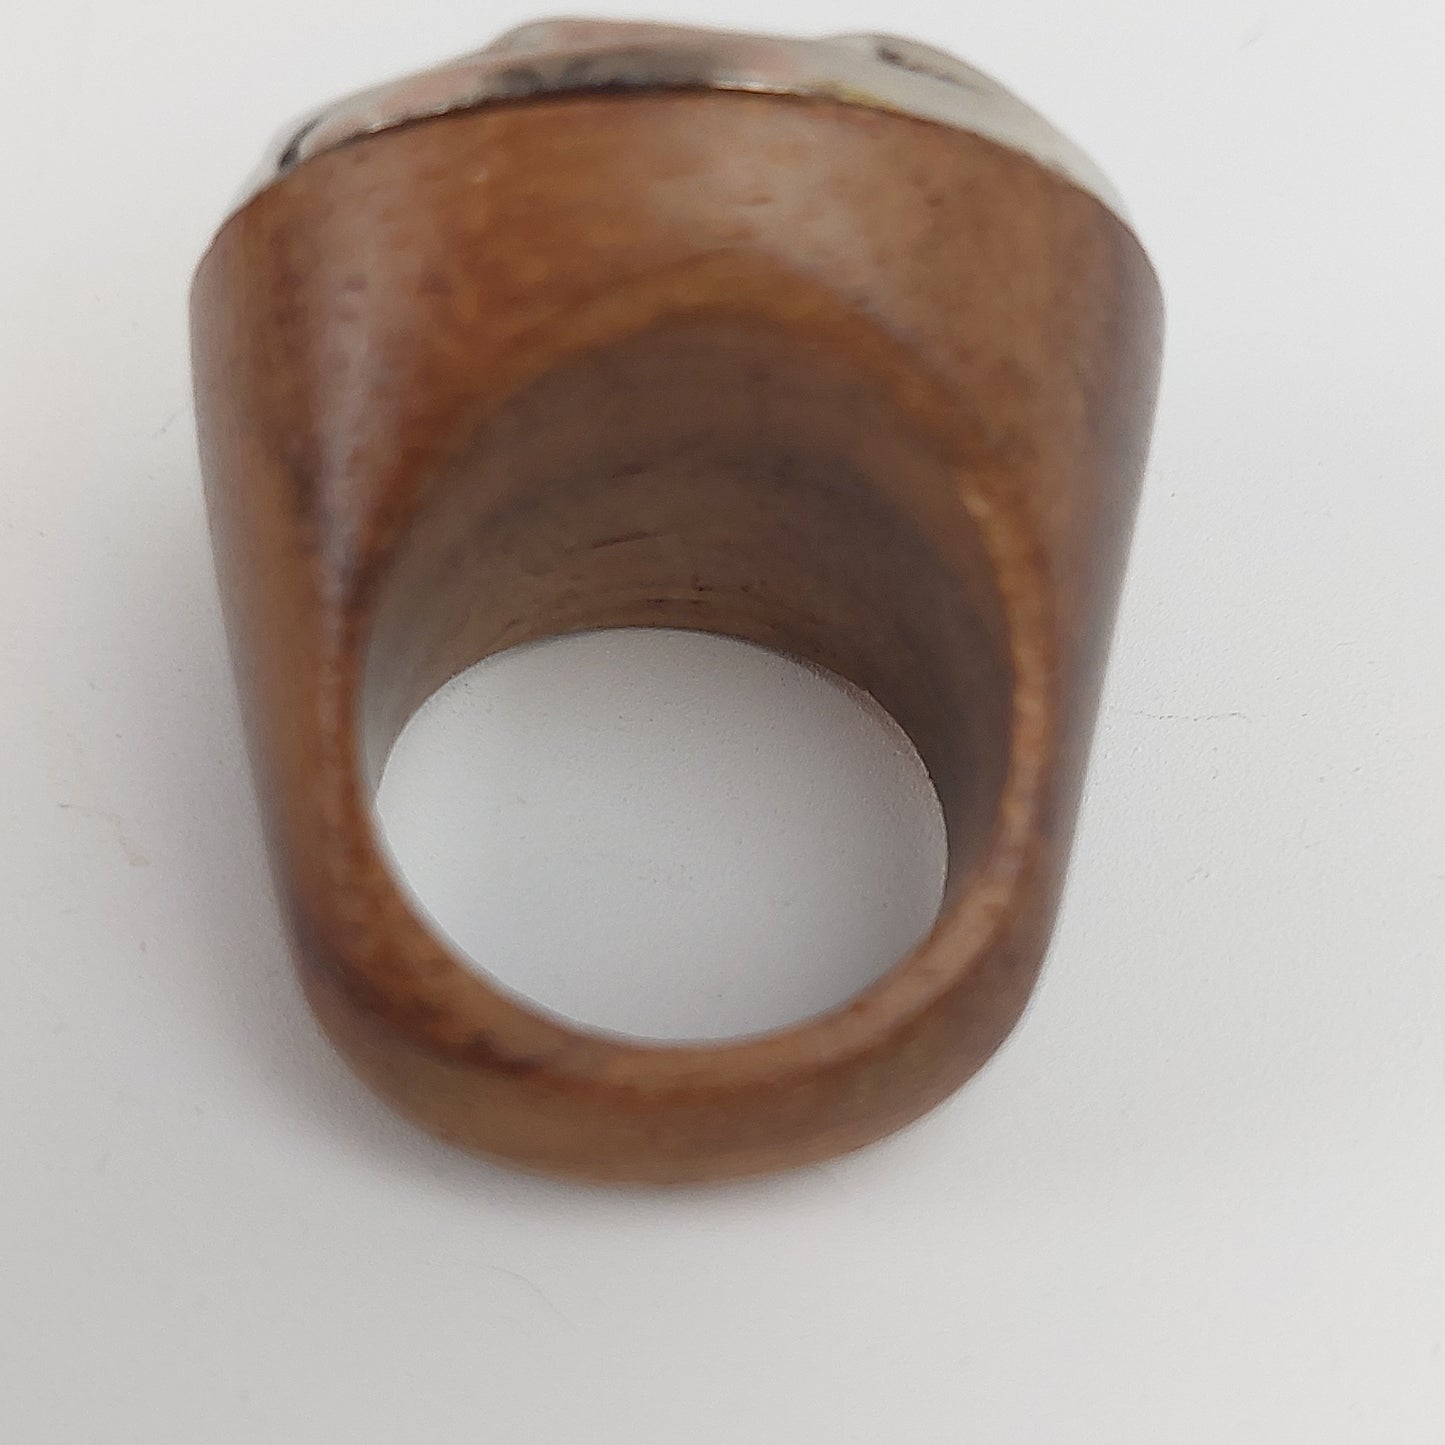 Vintage Silver and Carved Wood Ring, Size 6 Boho Statement